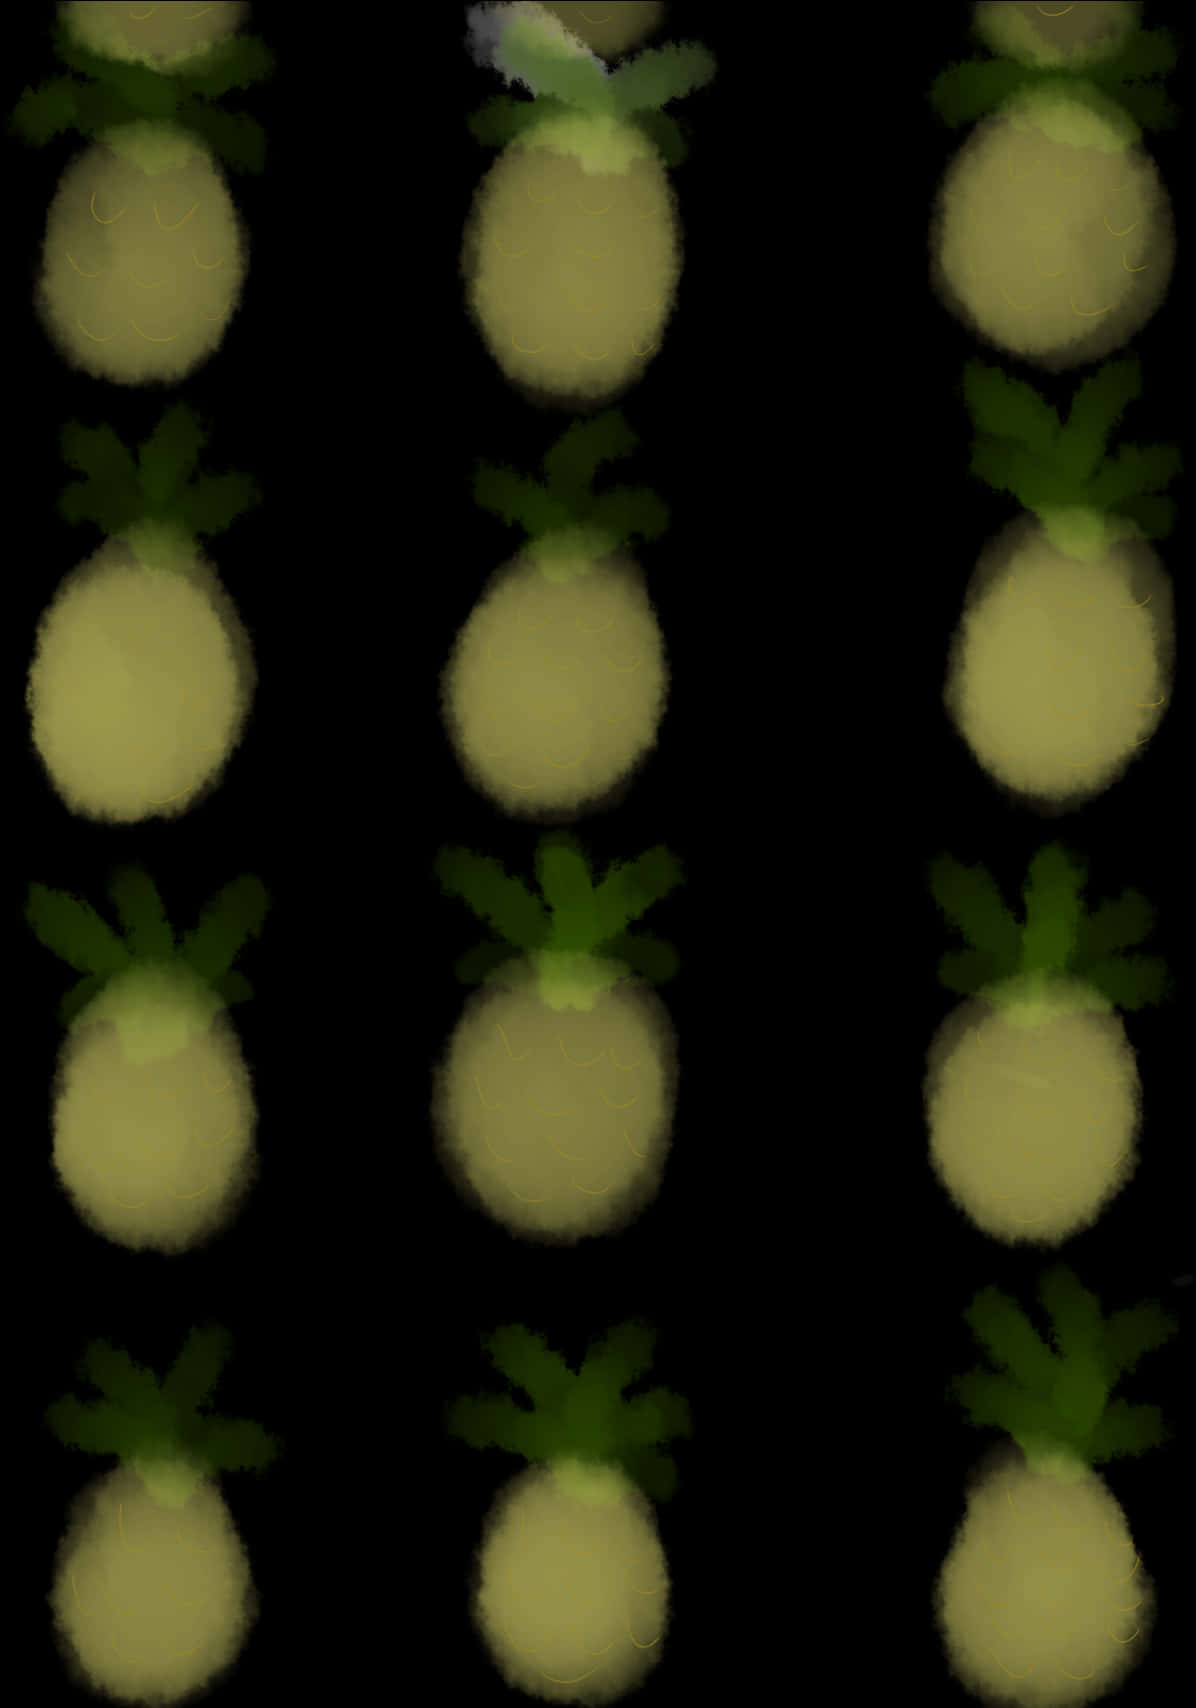 Pineapple Png